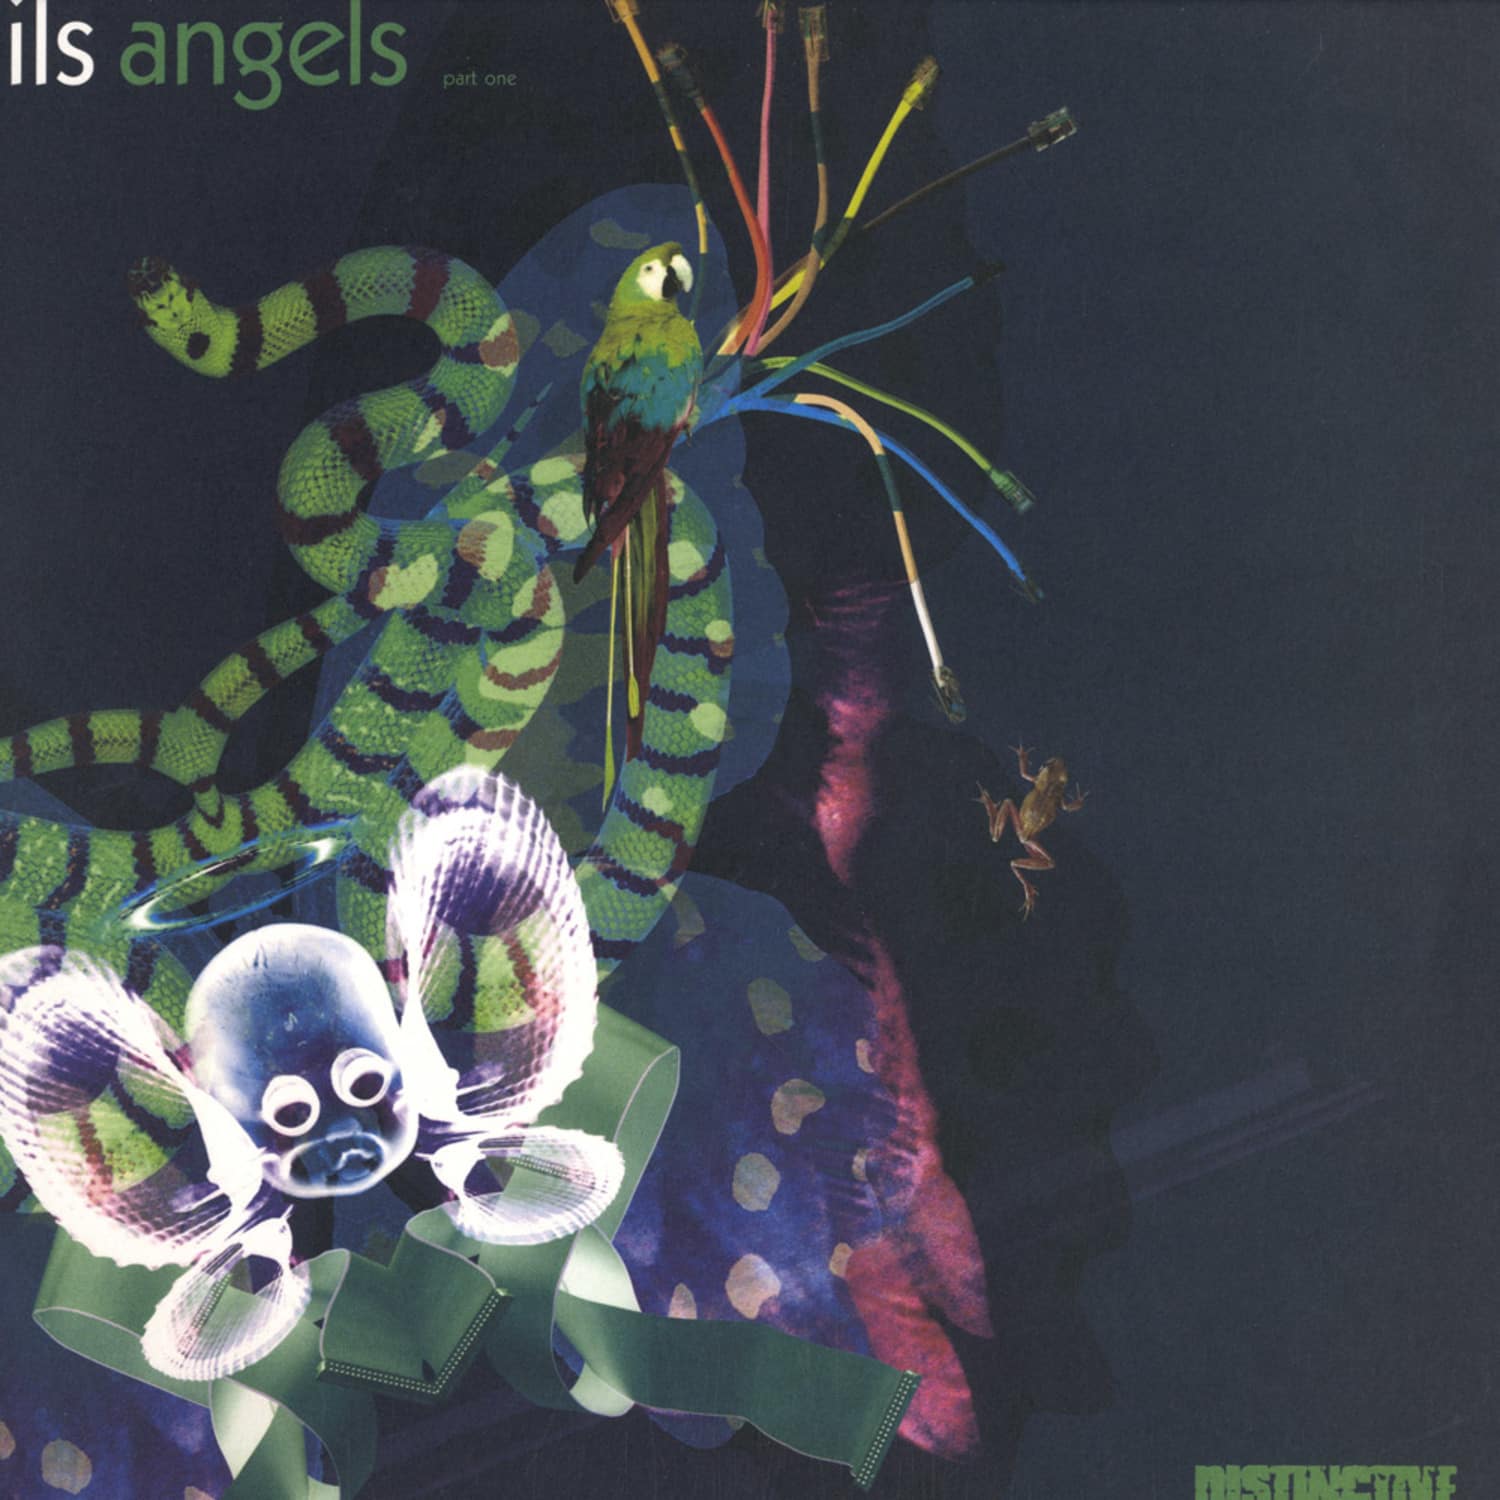 Ils Angels - PART ONE / ANGELS